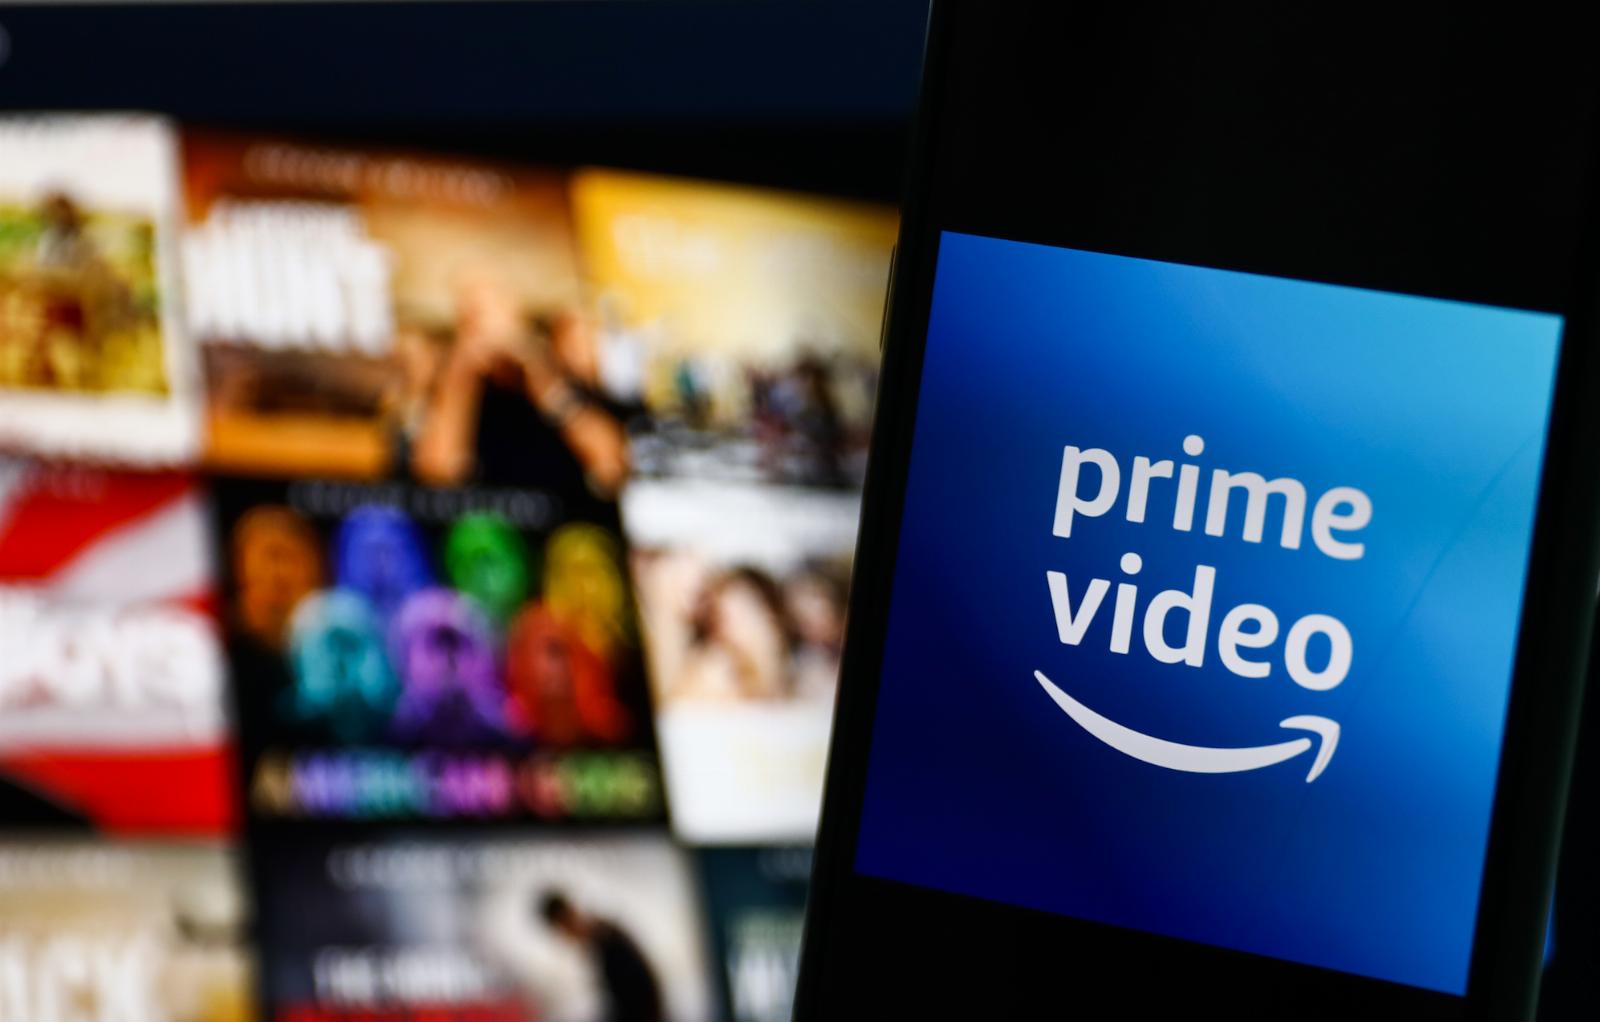 Amazon Prime Video and MGM Studios laid off hundreds of employees